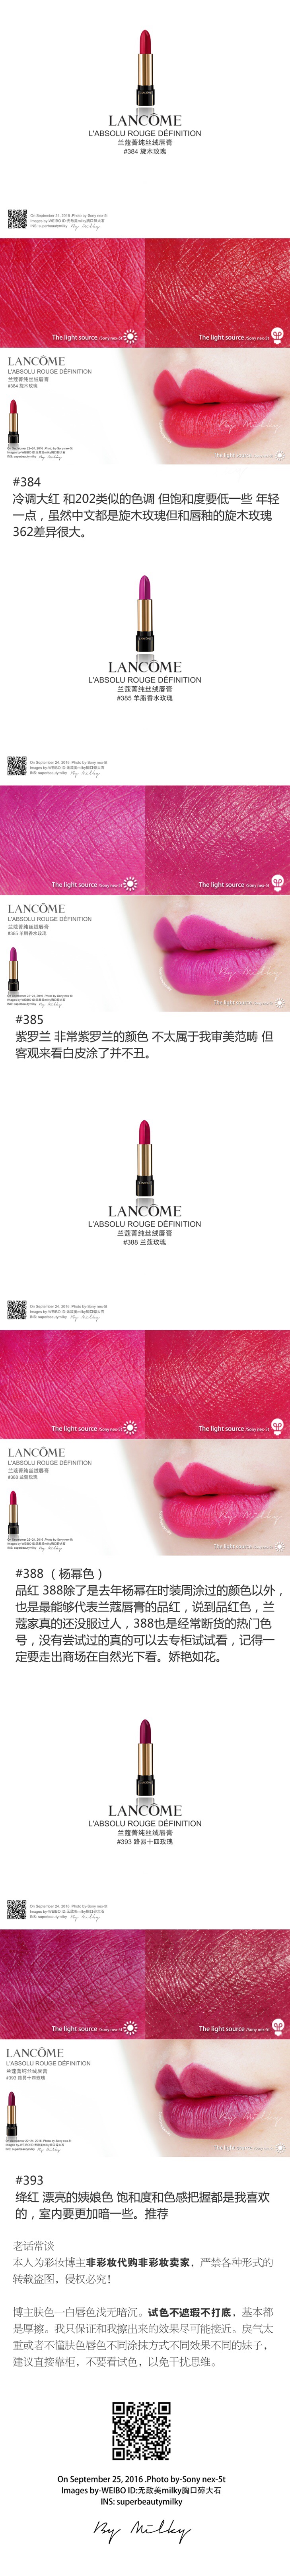 LANCOME L'ABSOLU ROUGE DEFINITION/兰蔻菁纯丝绒唇膏184/187/195/197/280/285/290/294/375/384/385/388/39 ...